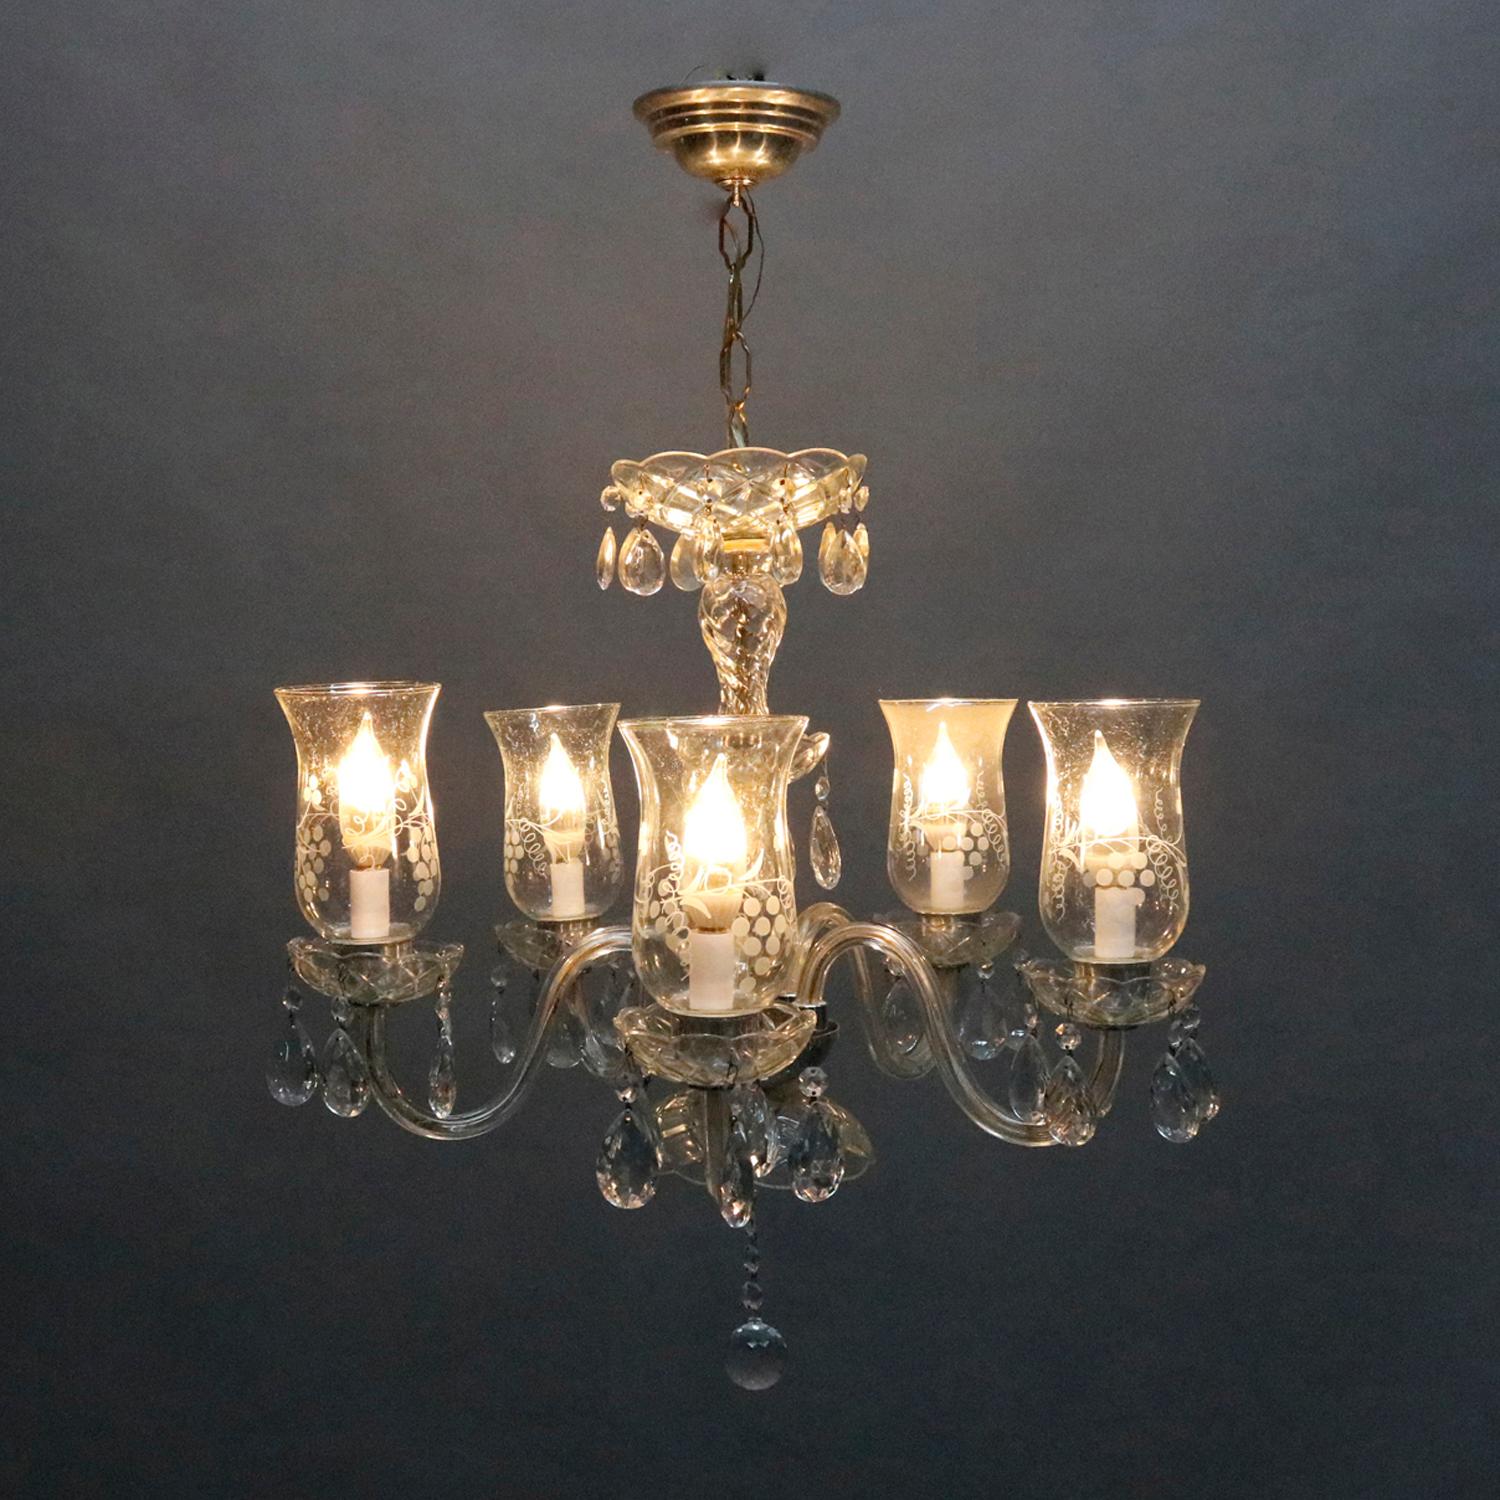 small bronze shallow 6 arm french chandelier